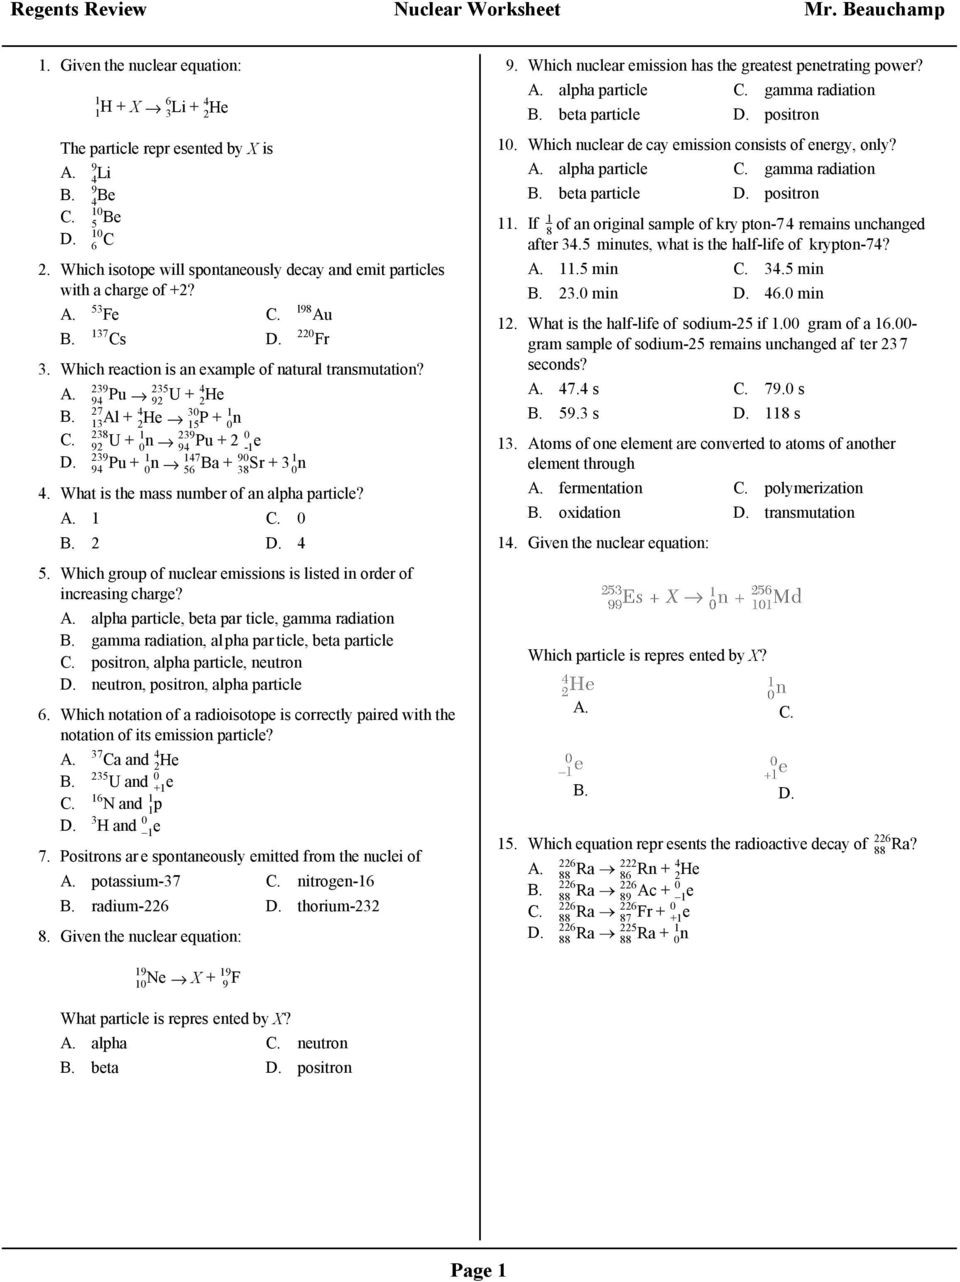 Nuclear Decay Worksheet Answers Regents Review Nuclear Worksheet Mr Beauchamp Pdf Free